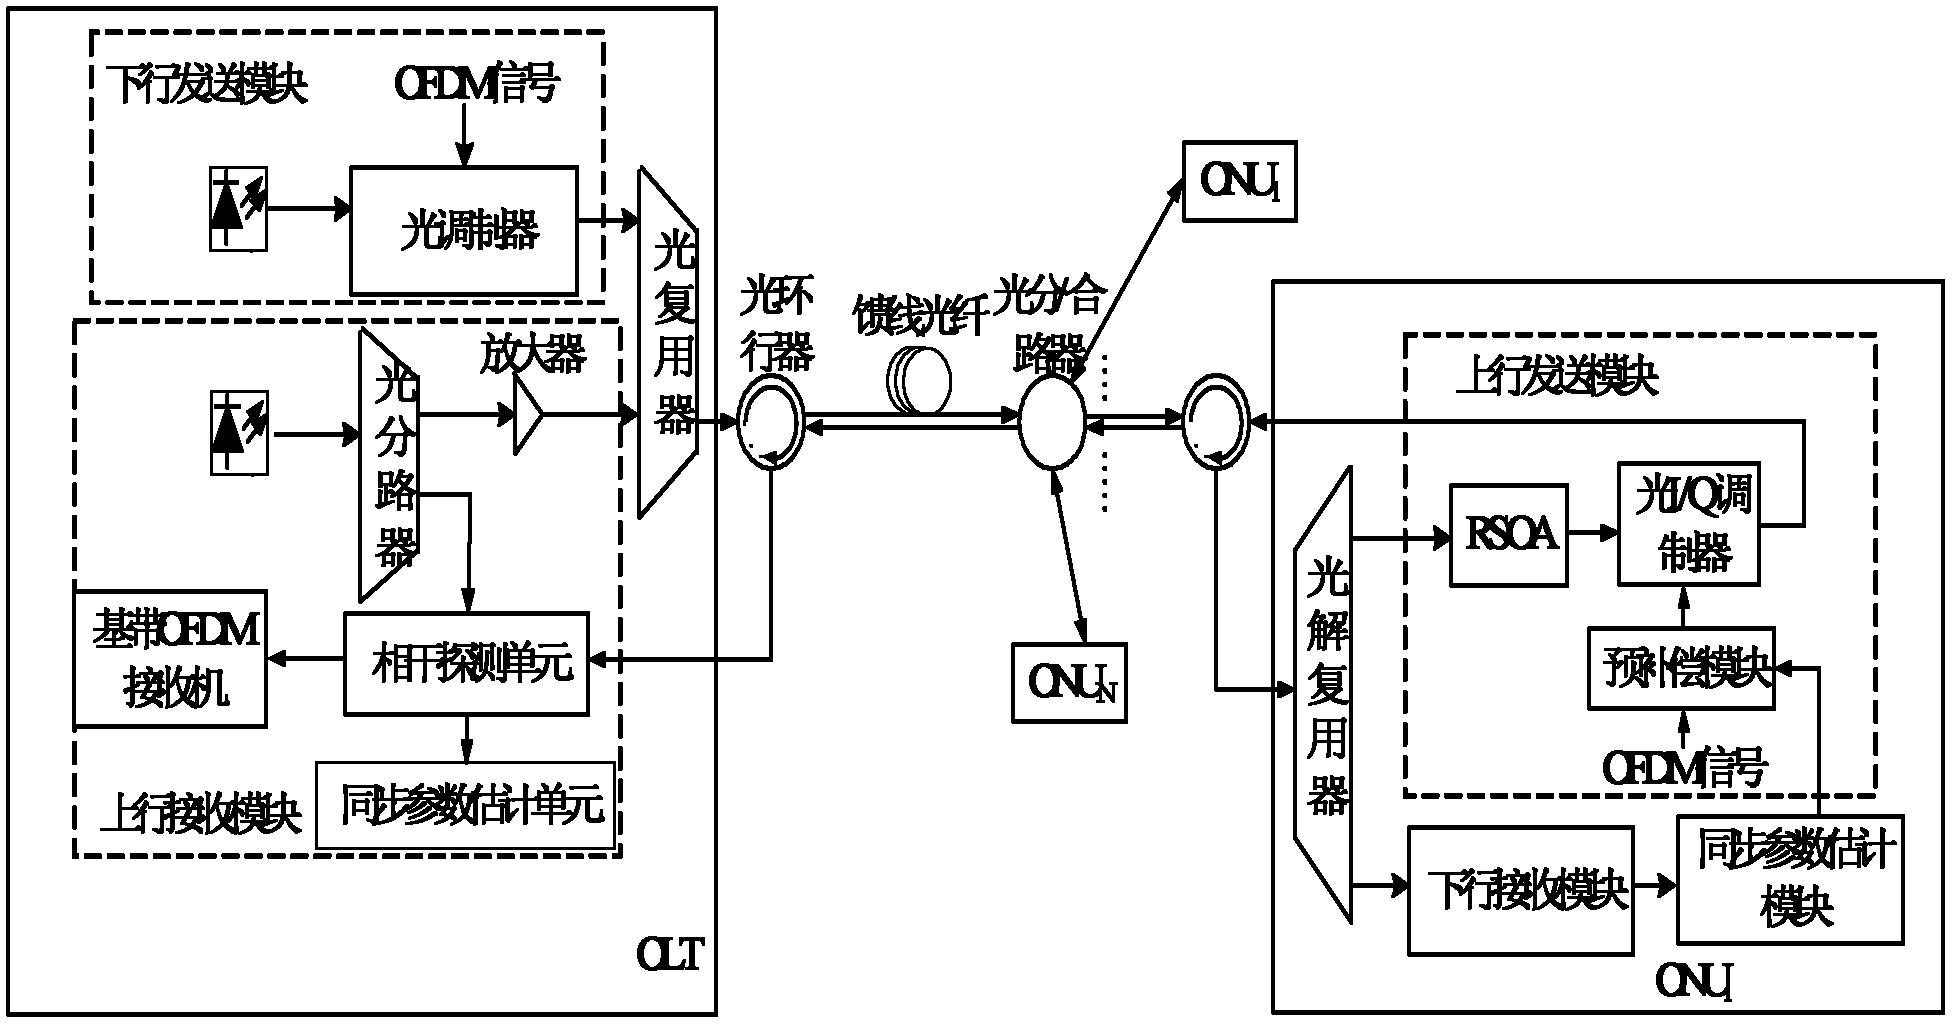 Orthogonal frequency division multiplexing passive optical network system